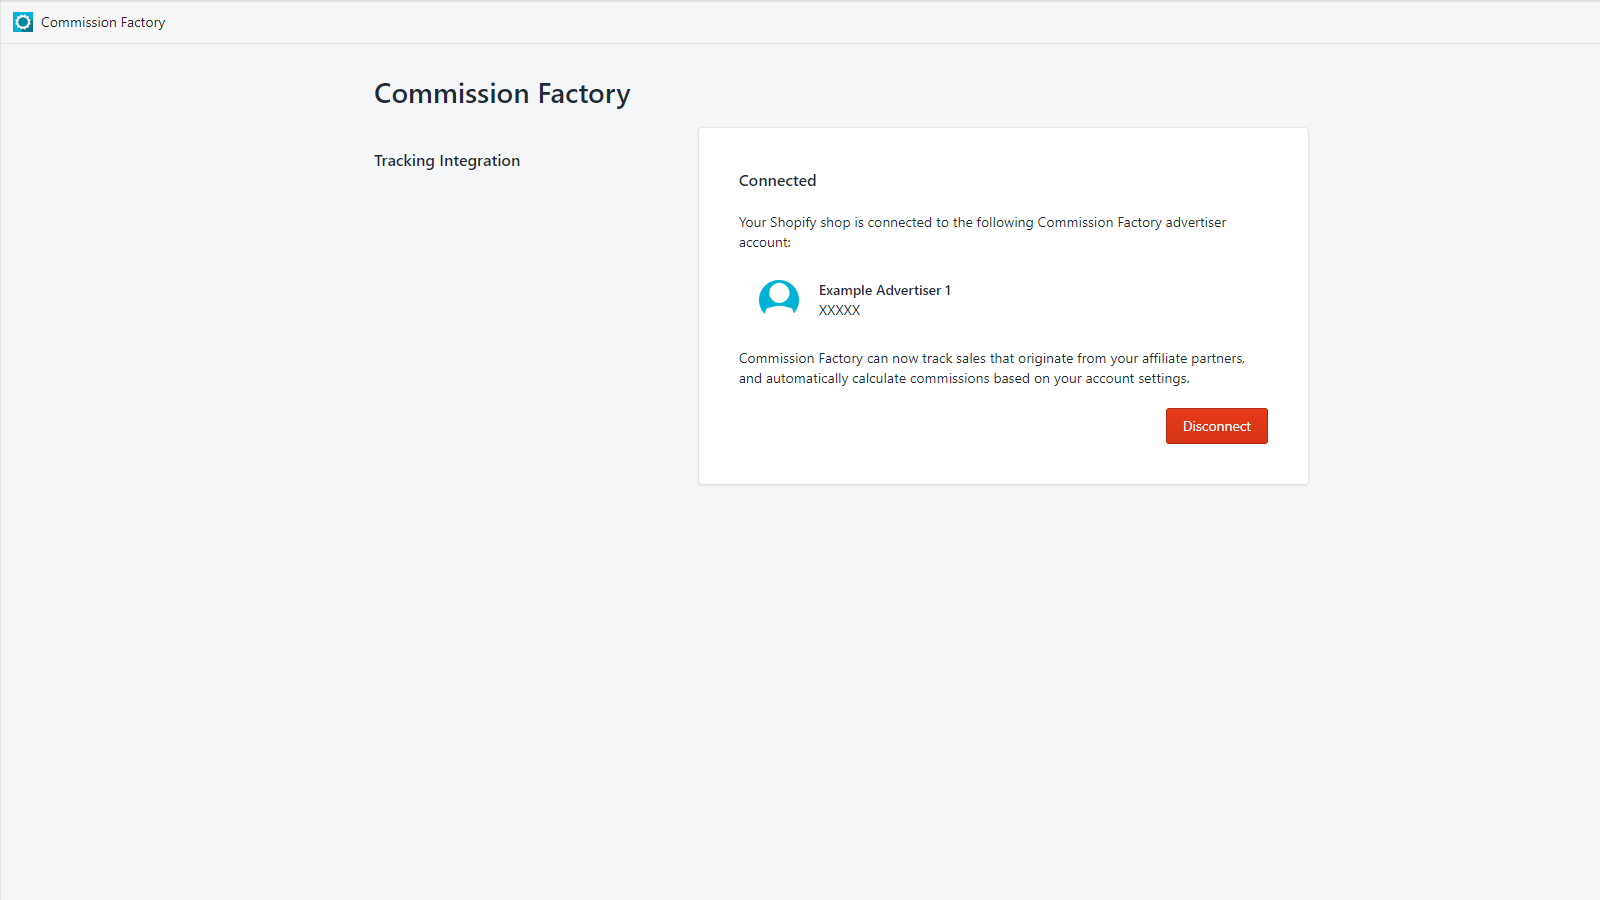 Just like that, you're fully integrated with Commission Factory